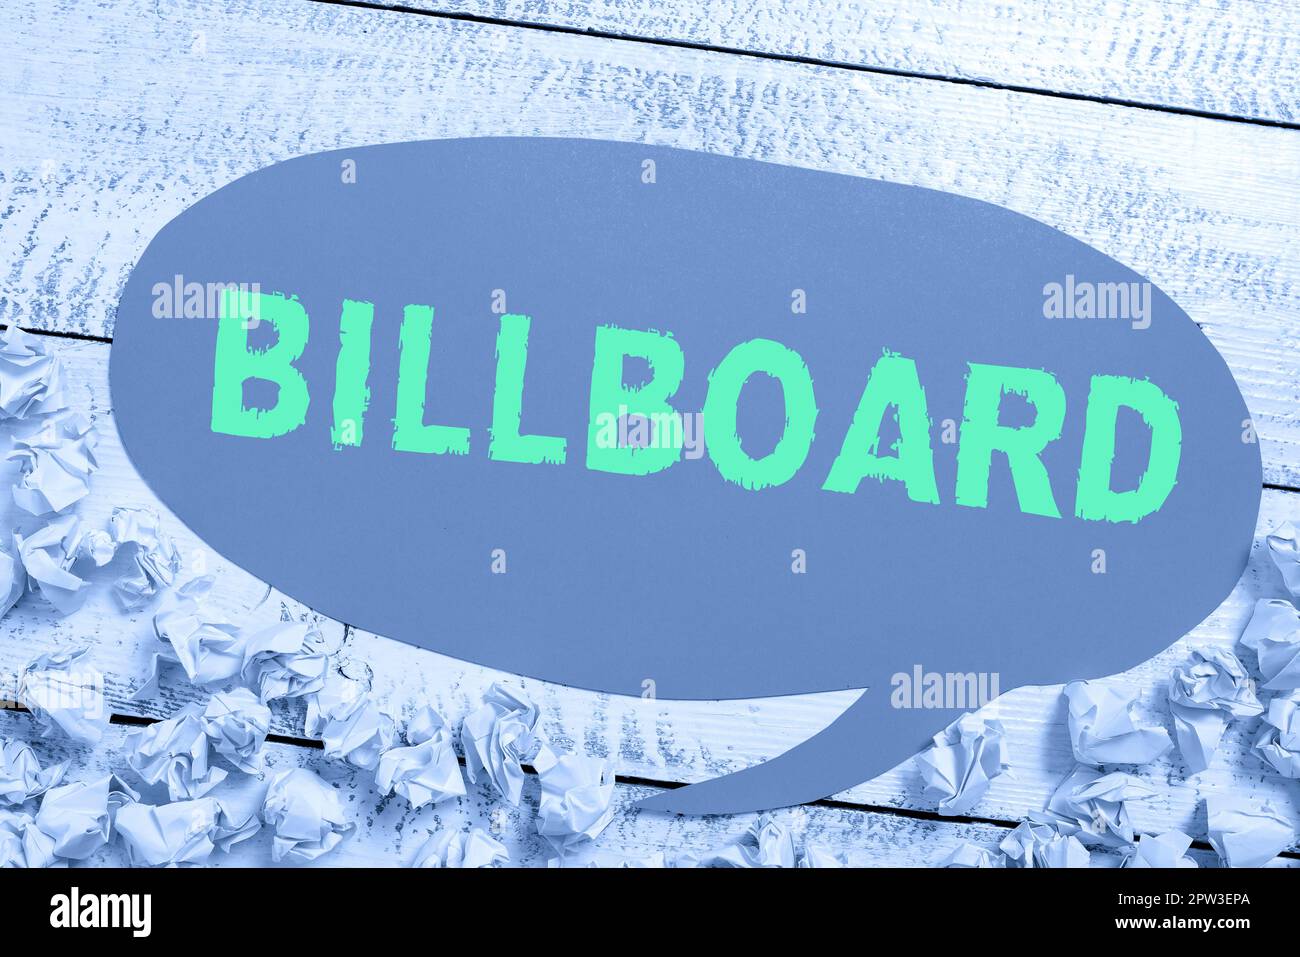 Inspiration showing sign Billboard, Business approach a wide outdoor board for displaying normally on the side of a road Stock Photo